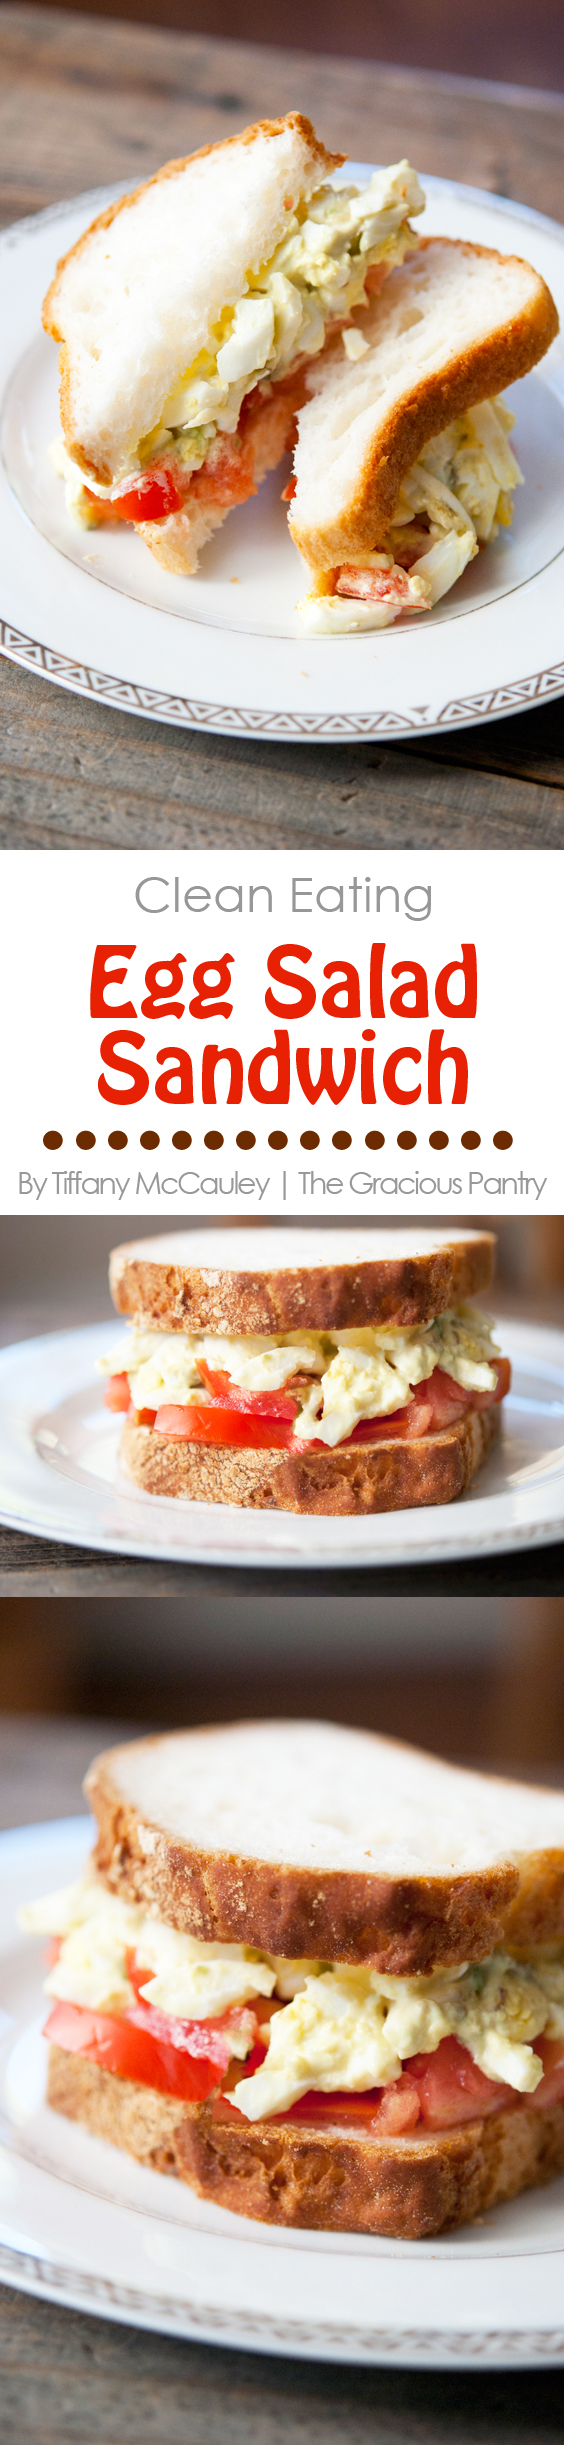 Clean Eating Egg Salad Sandwich Recipe | The Gracious Pantry